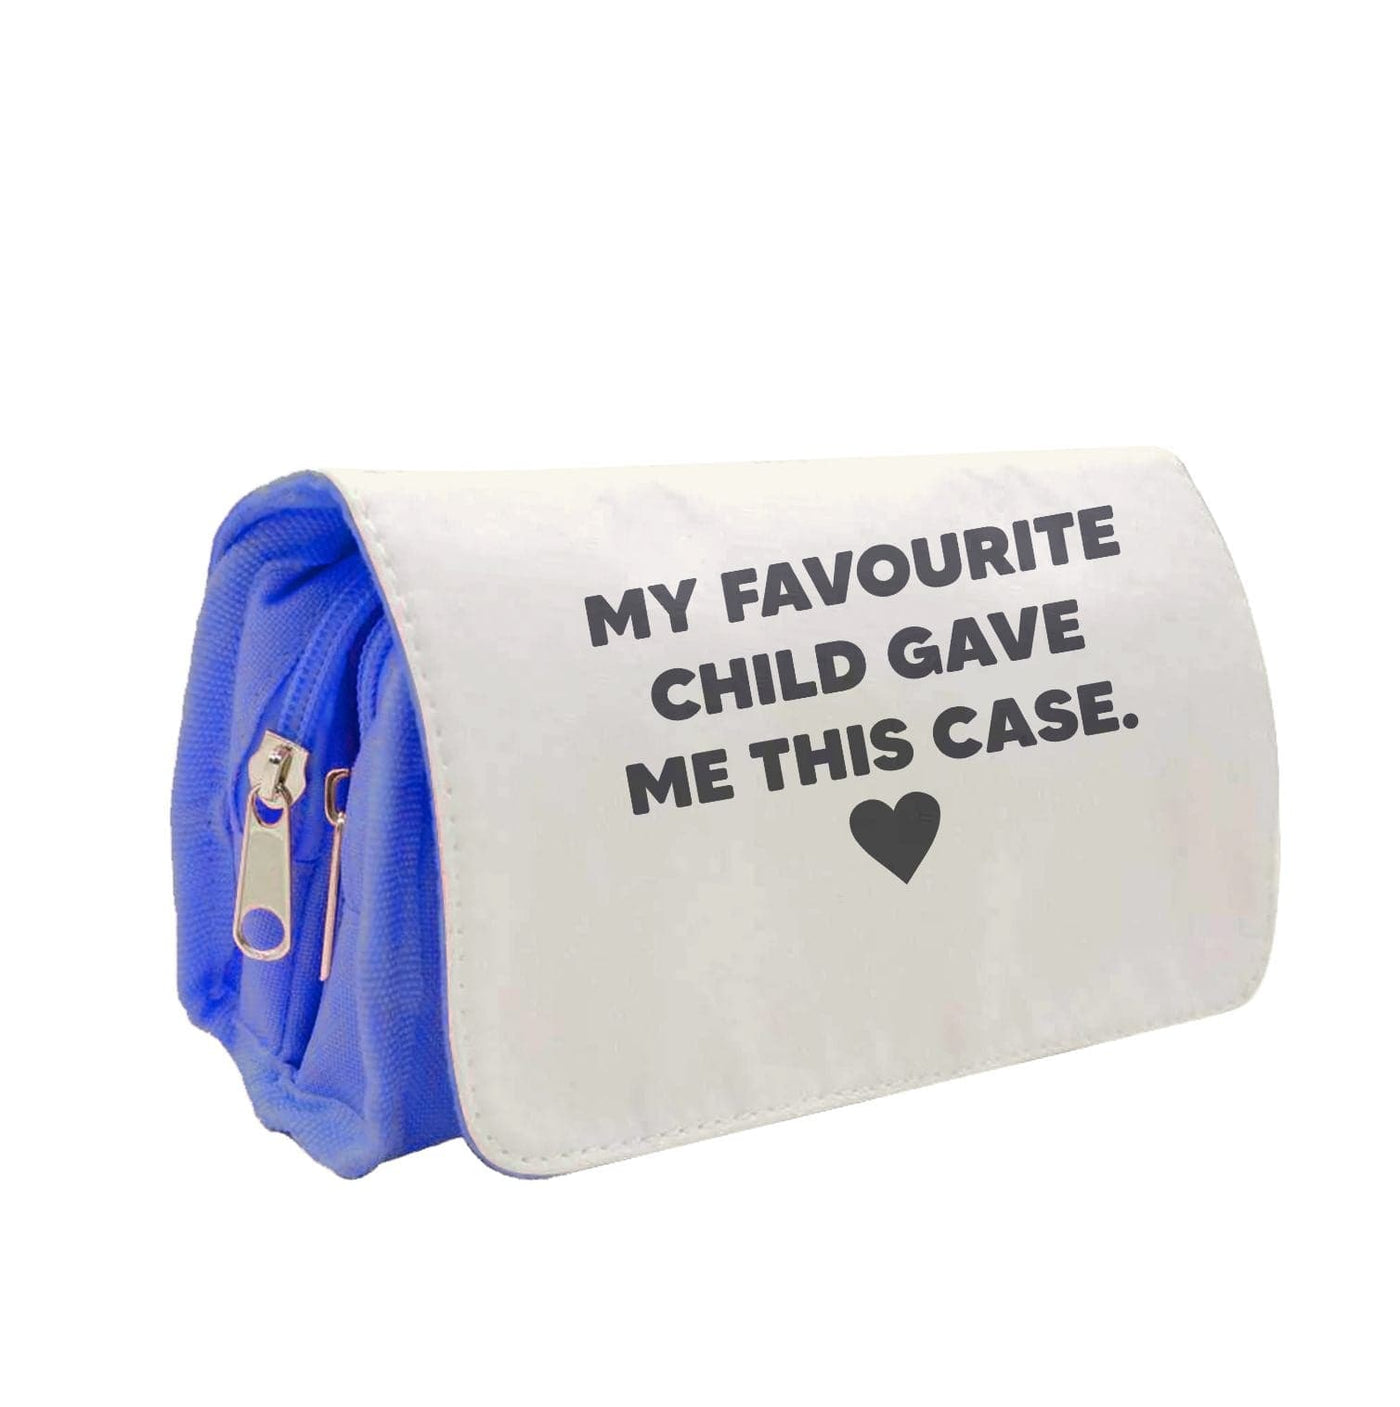 My Favourite Child Gave Me This - Mothers Day Pencil Case